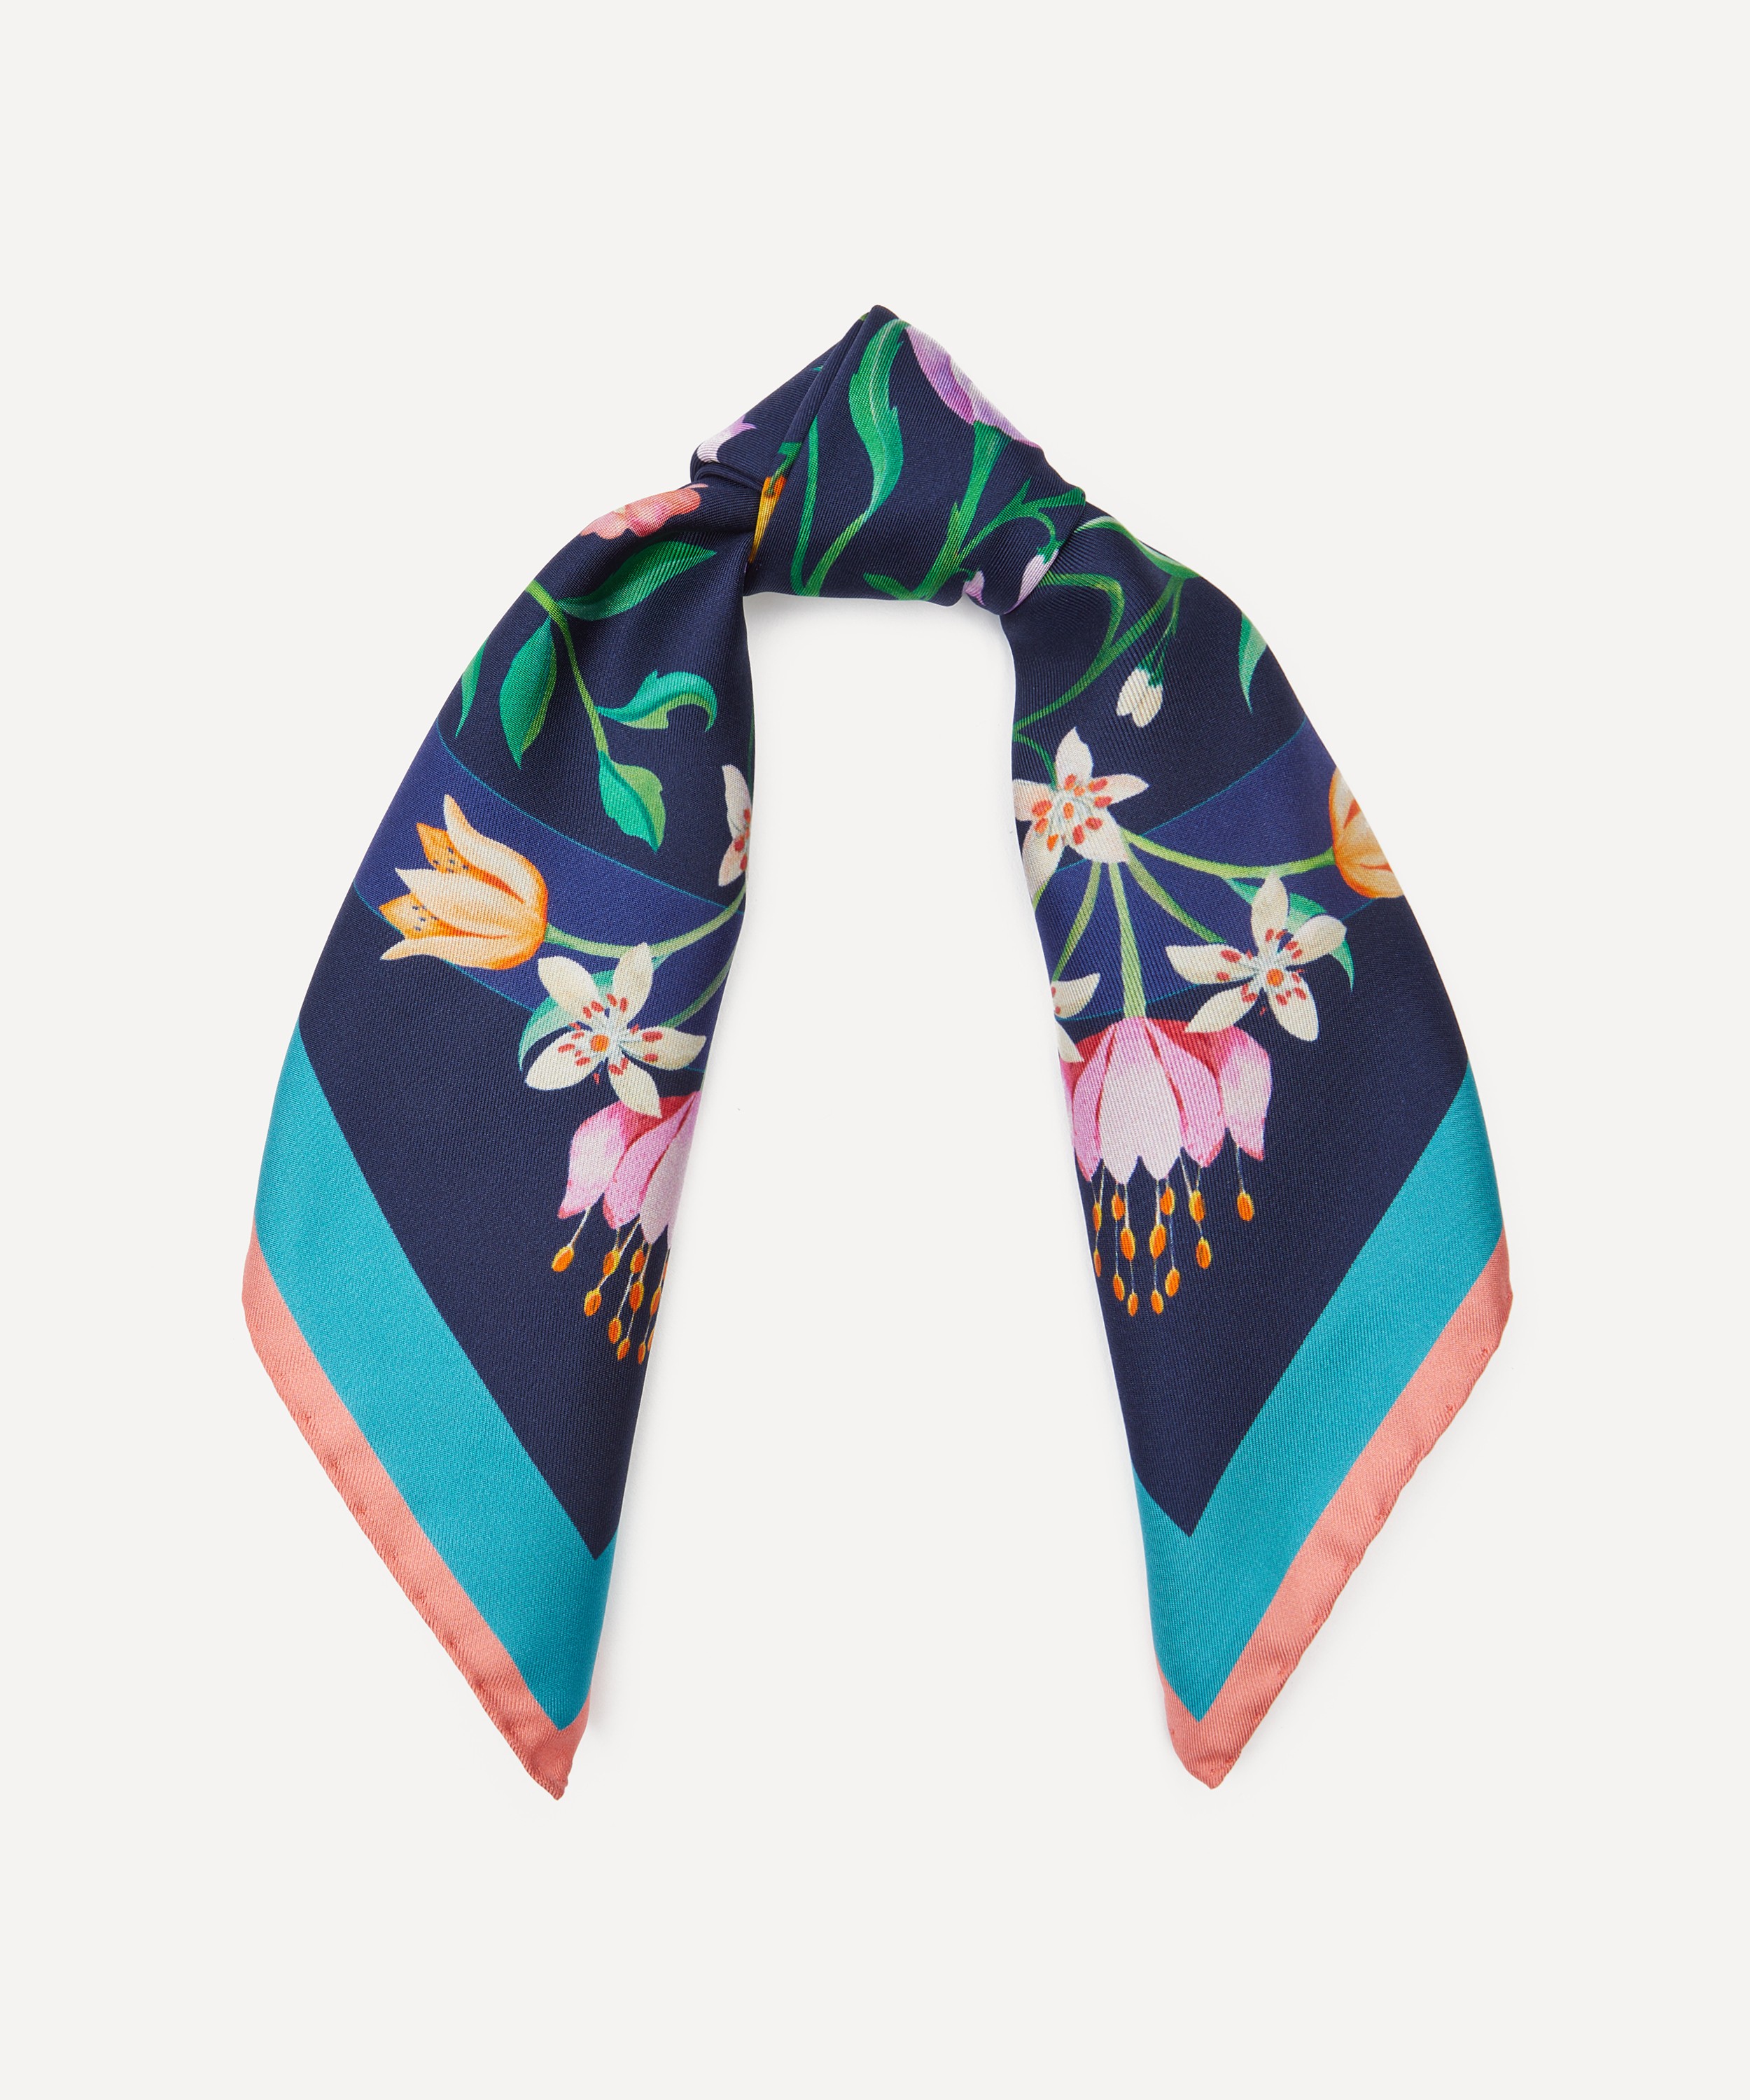 Buy Joules Twill Square Scarf from the Joules online shop